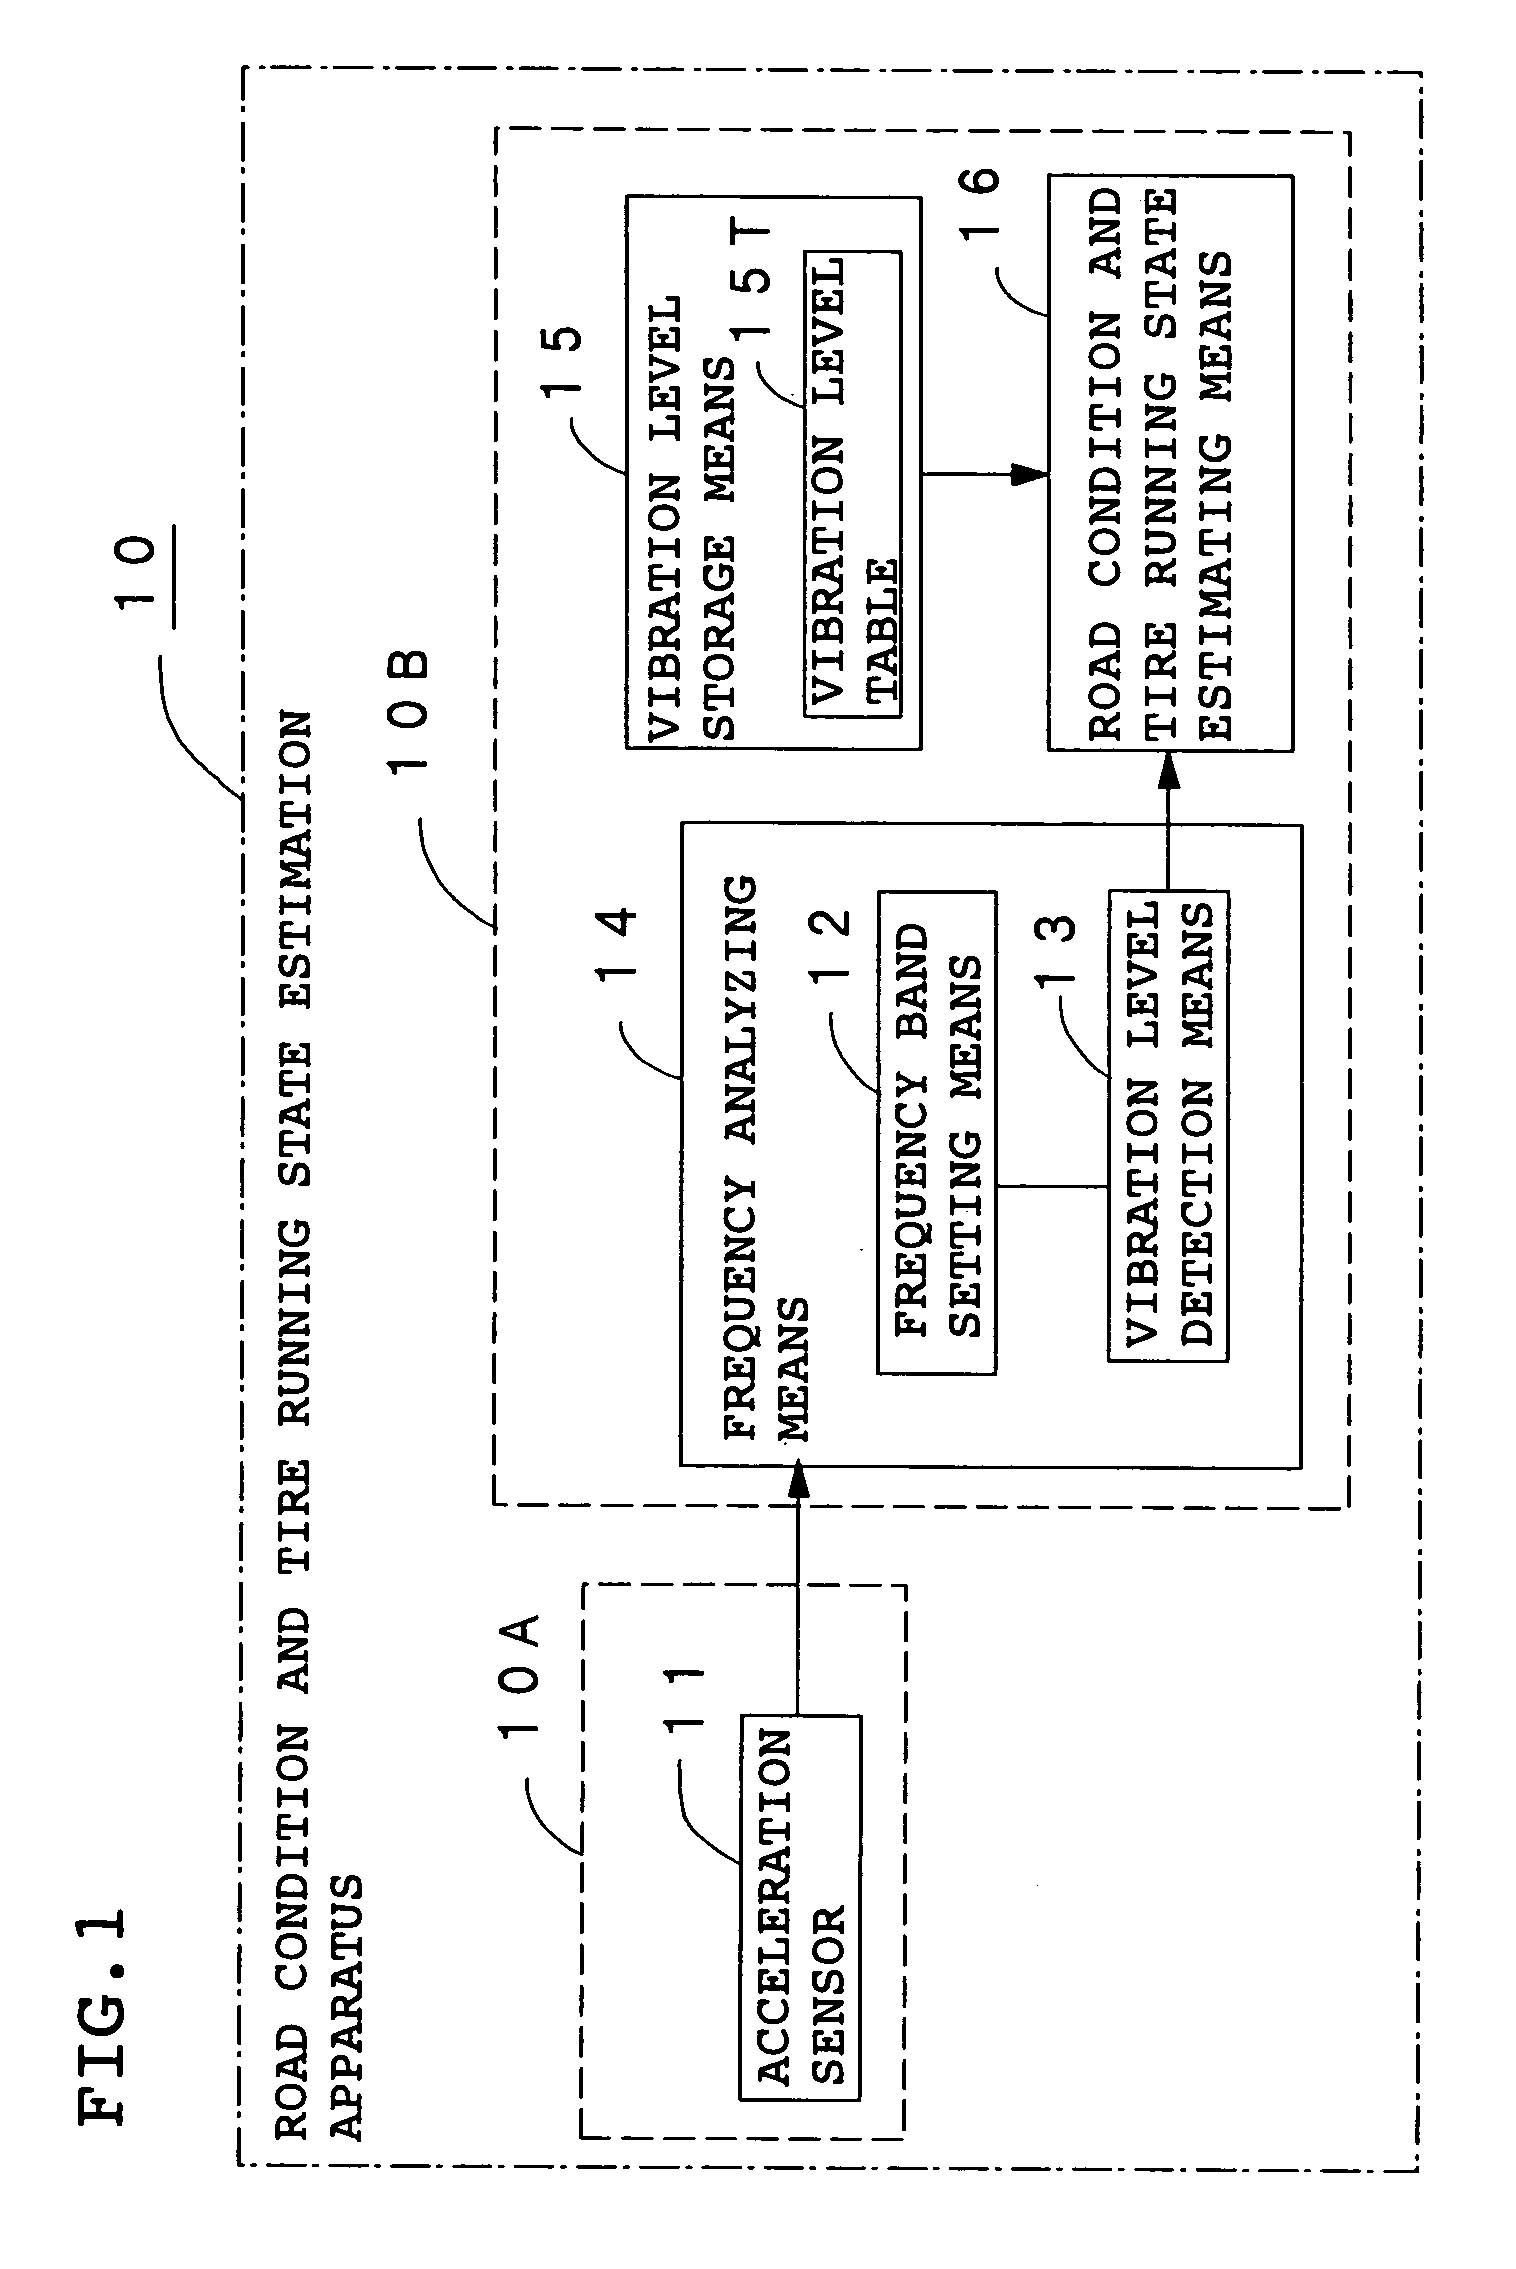 Method and apparatus for estimating road surface state and tire running state, ABS and vehicle control using the same